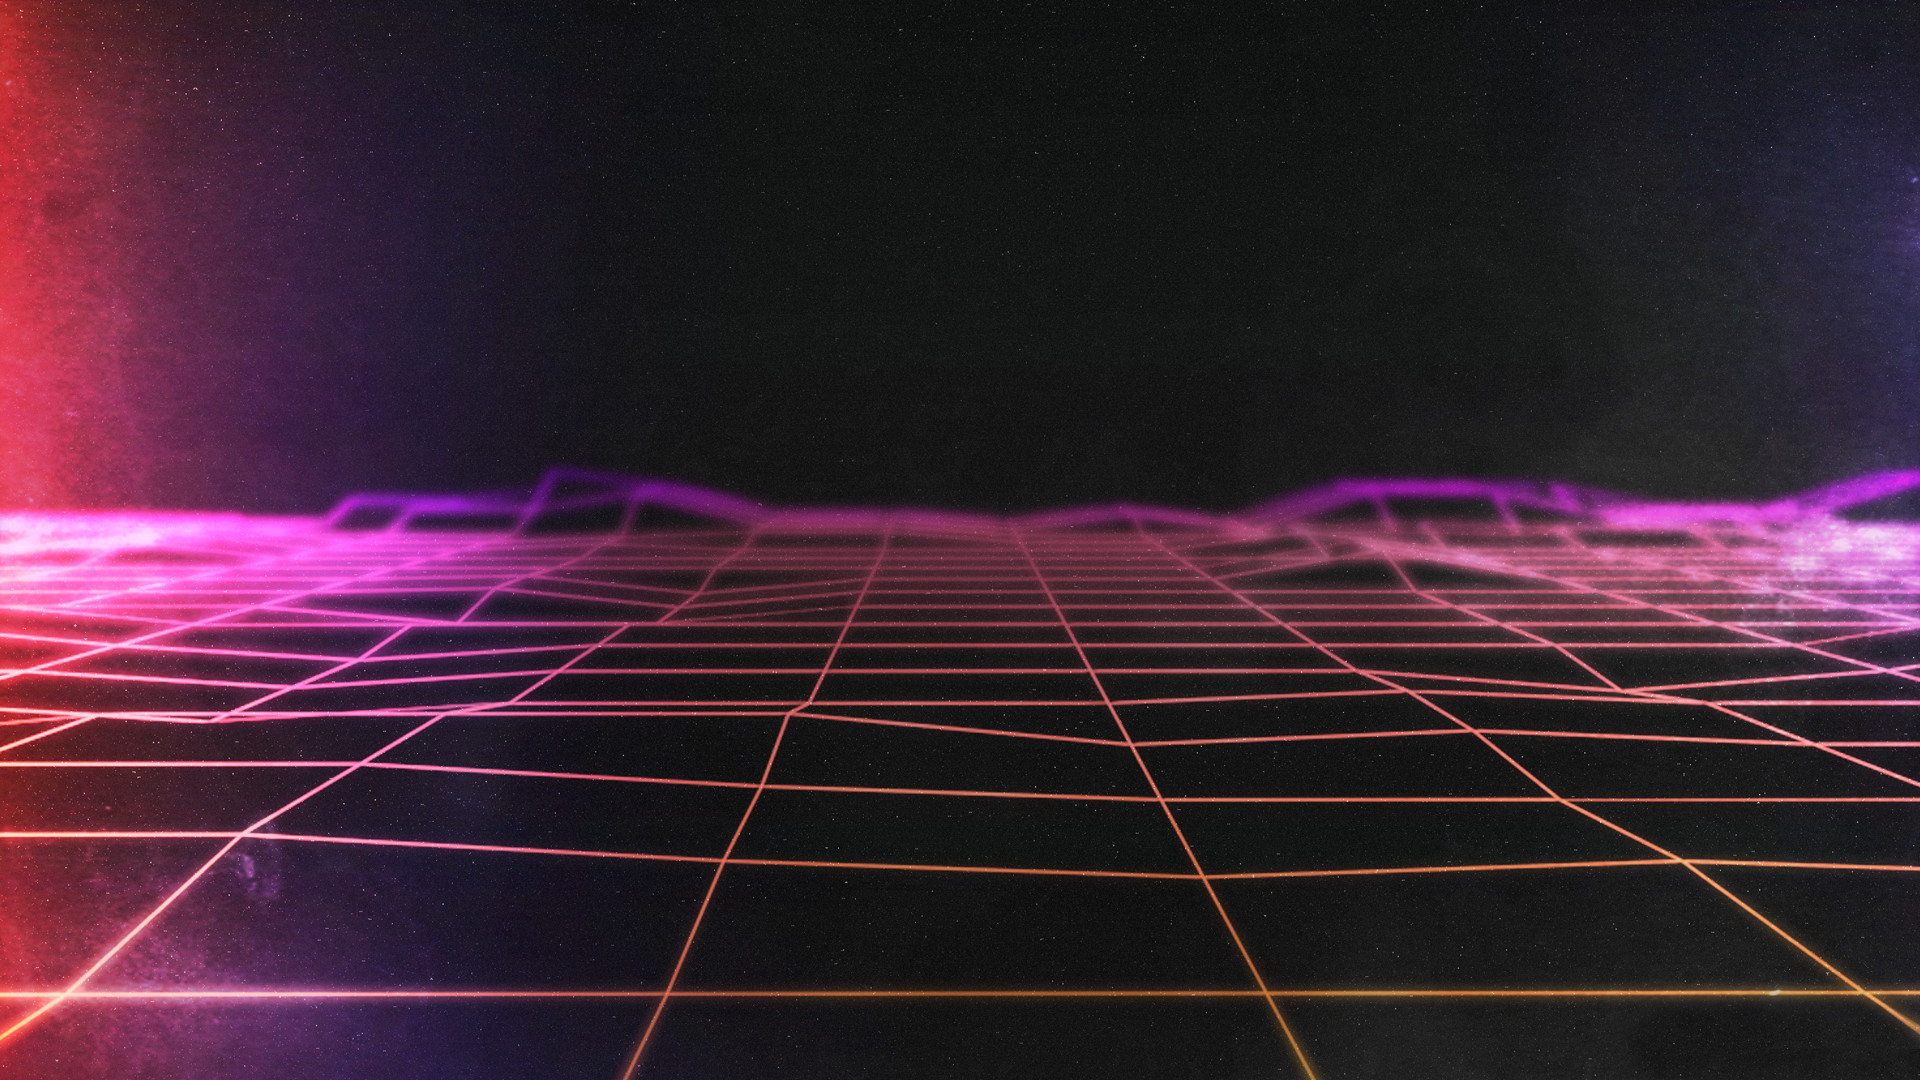 1920x1080 Have a wallpaper that you guys may like. "The Grid" ...